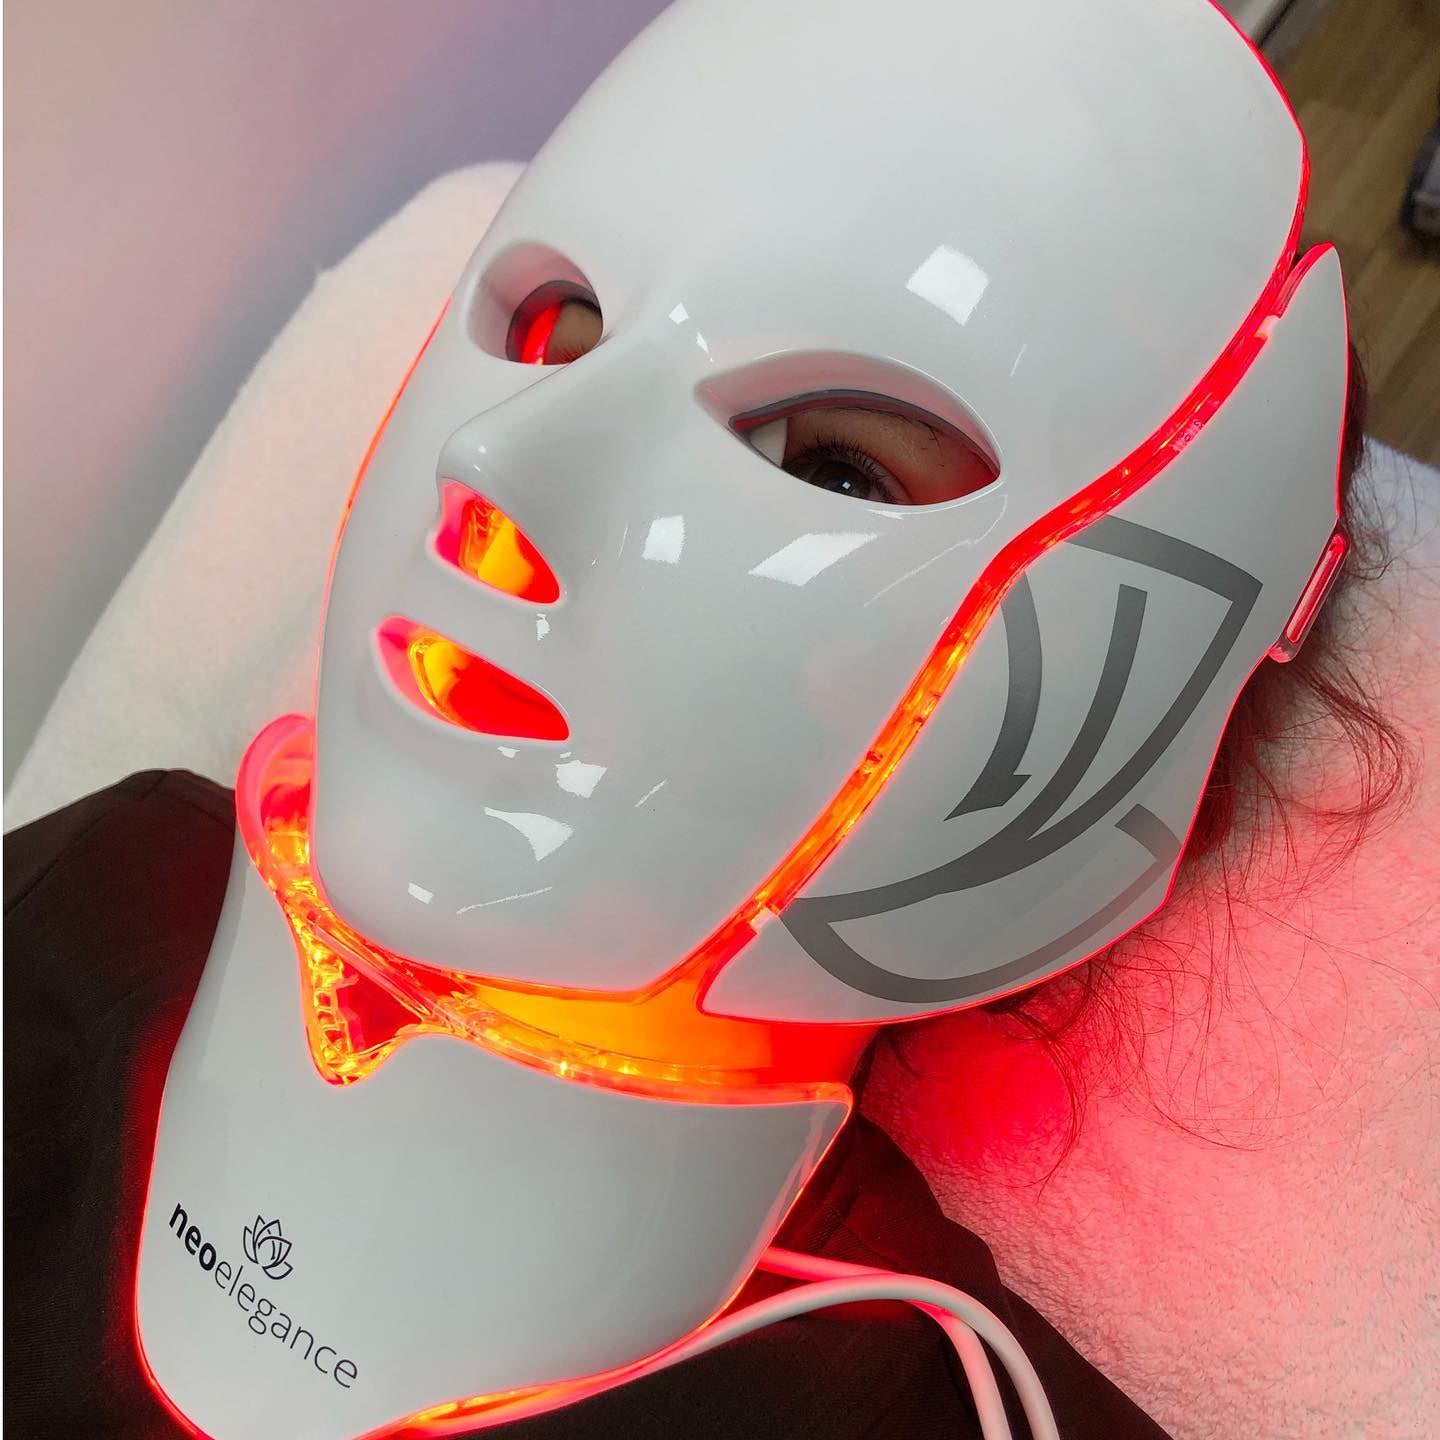 A NeoElegance customer having a face mask treatment using one of their new LED masks